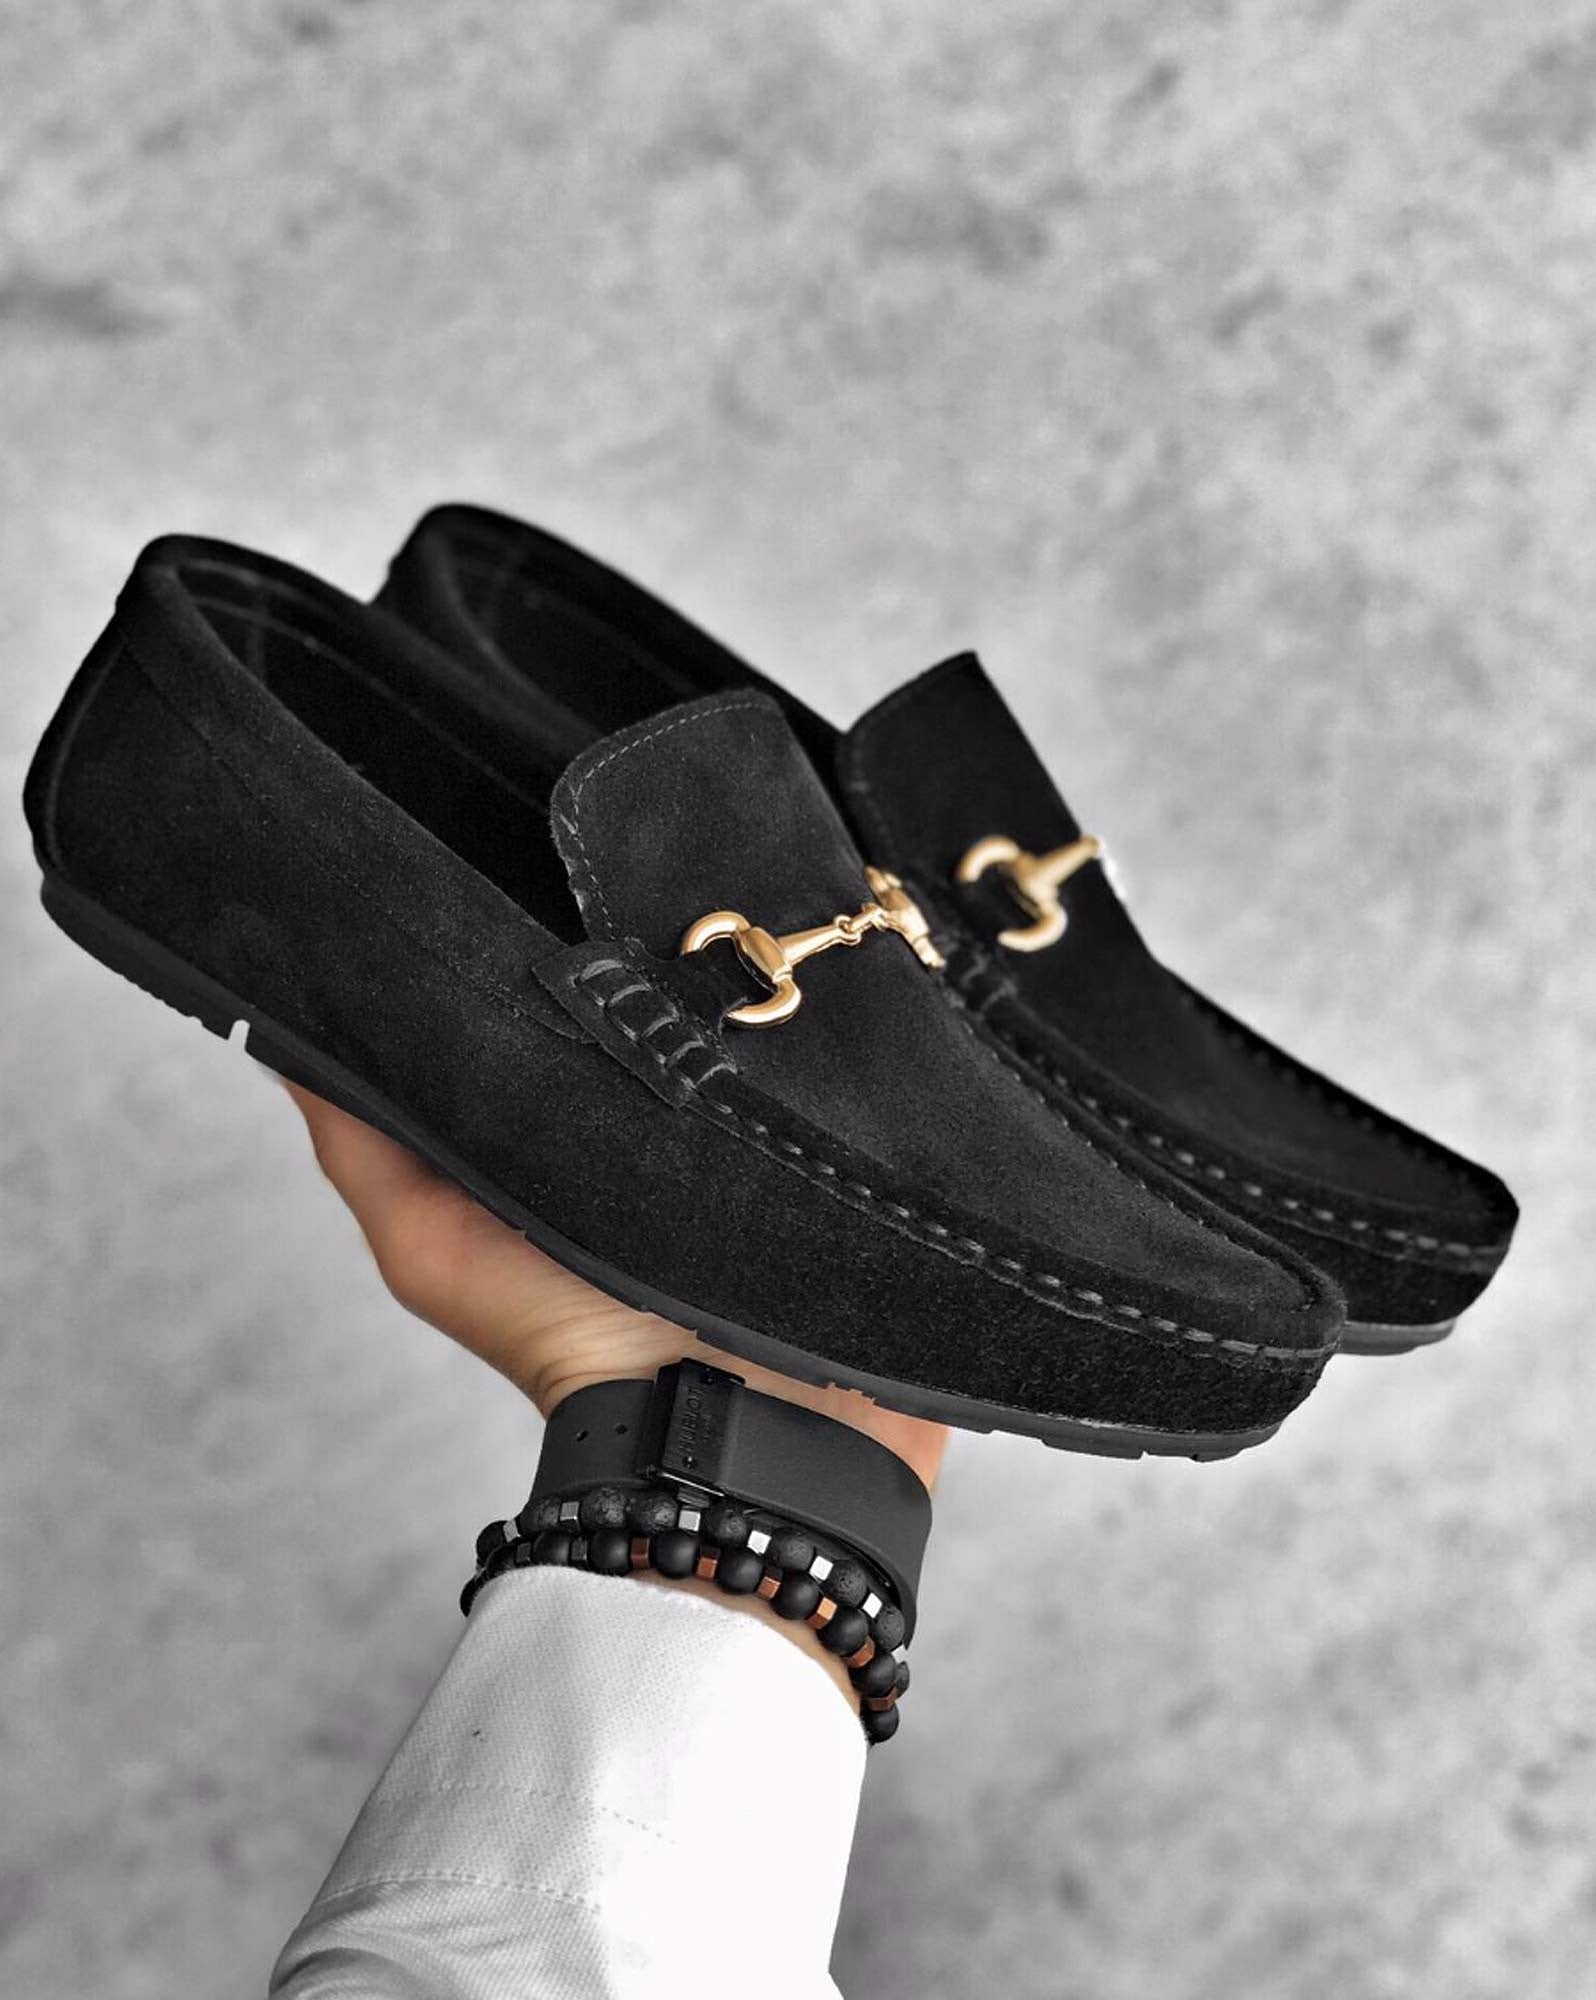 Black suede-look moccasin with fancy chain